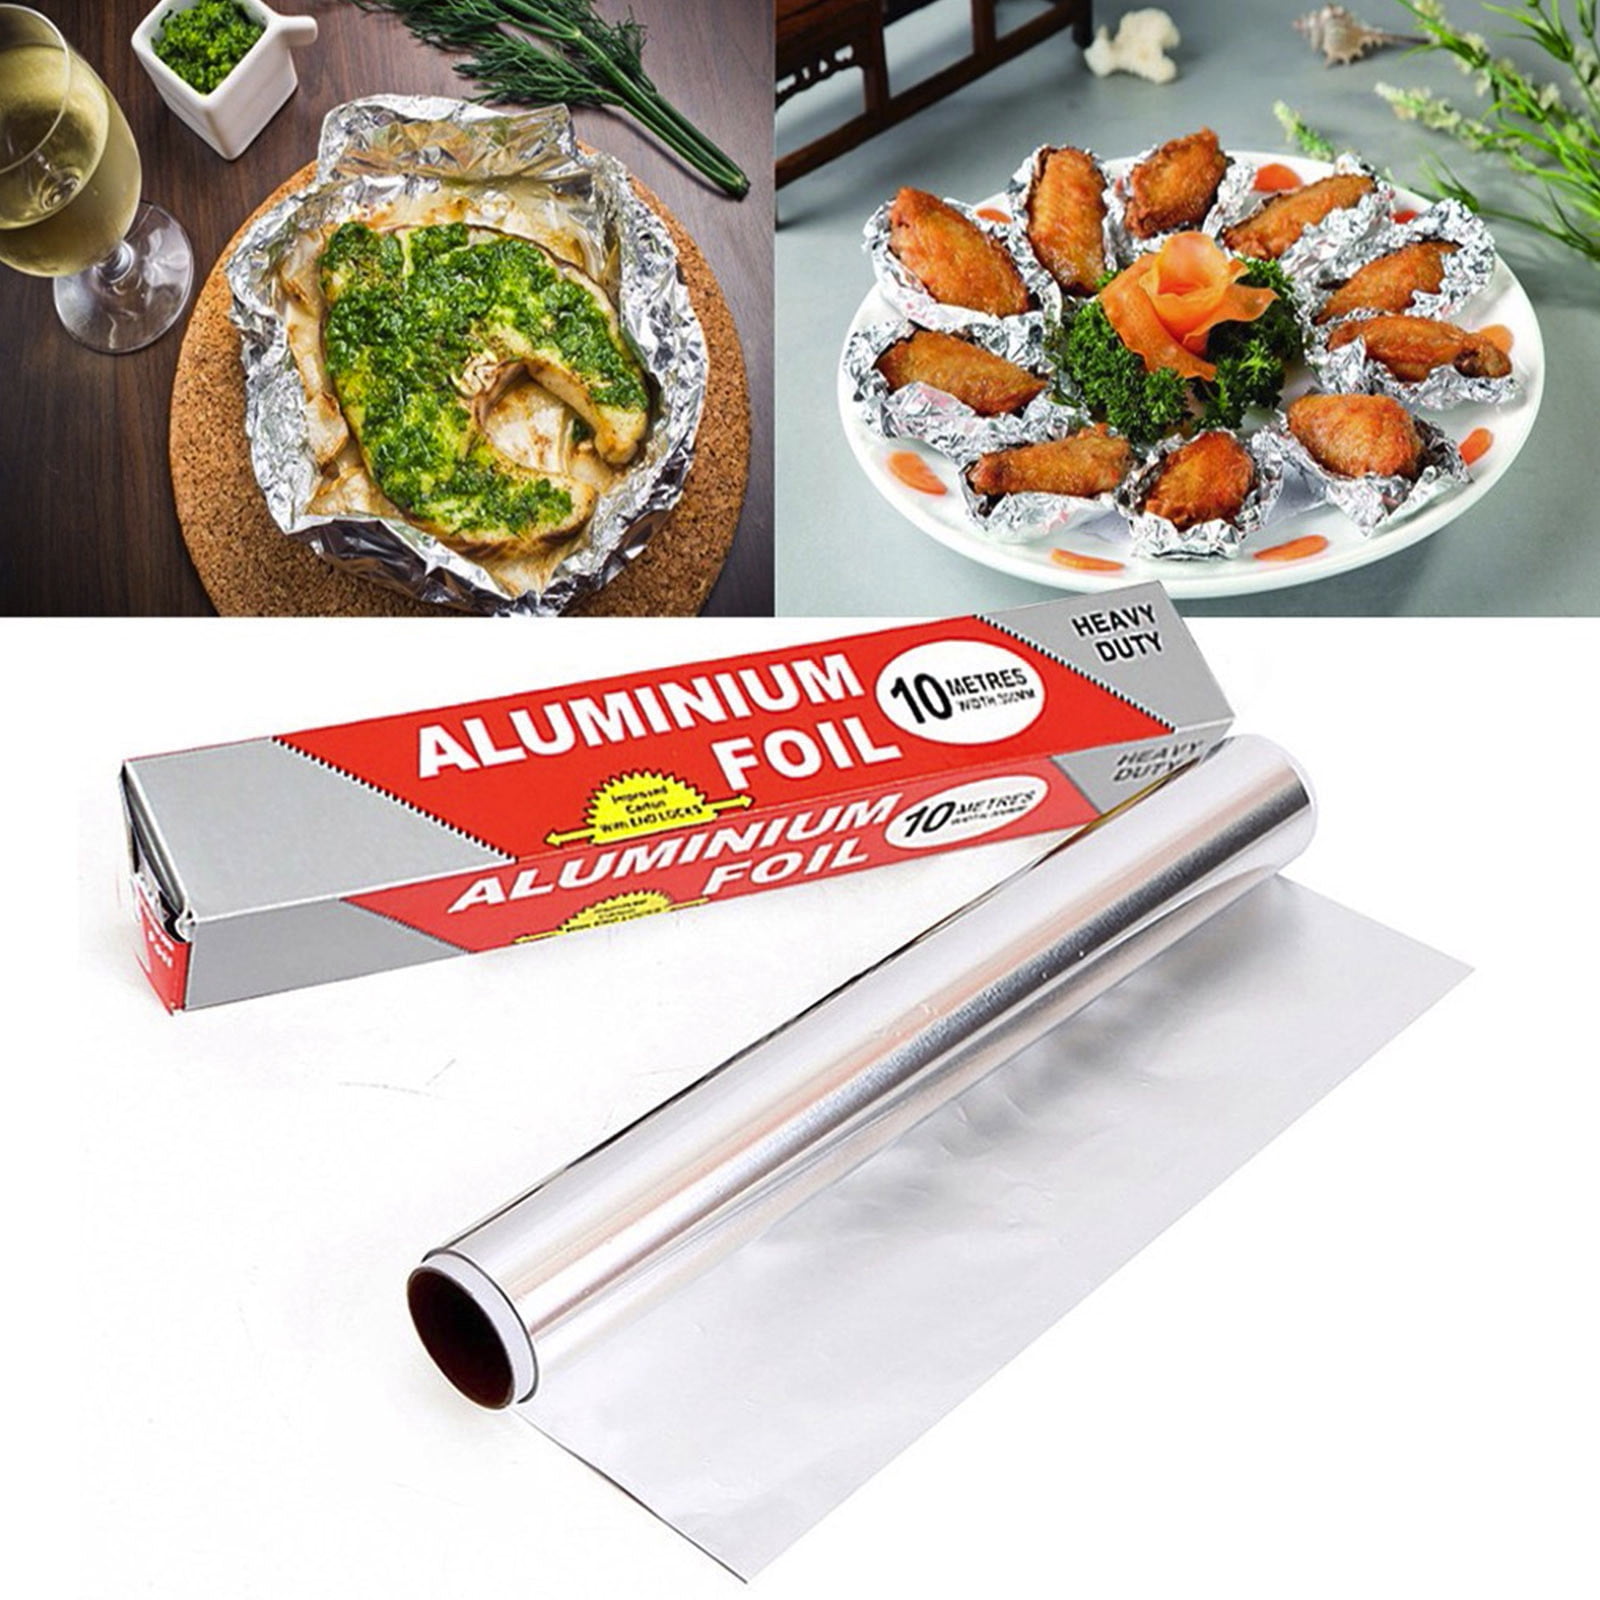 KITCHEN ALUMINIUM FOIL CATERING FOOD BAKING OVEN  BAKING GRILLING OR WRAPPER 